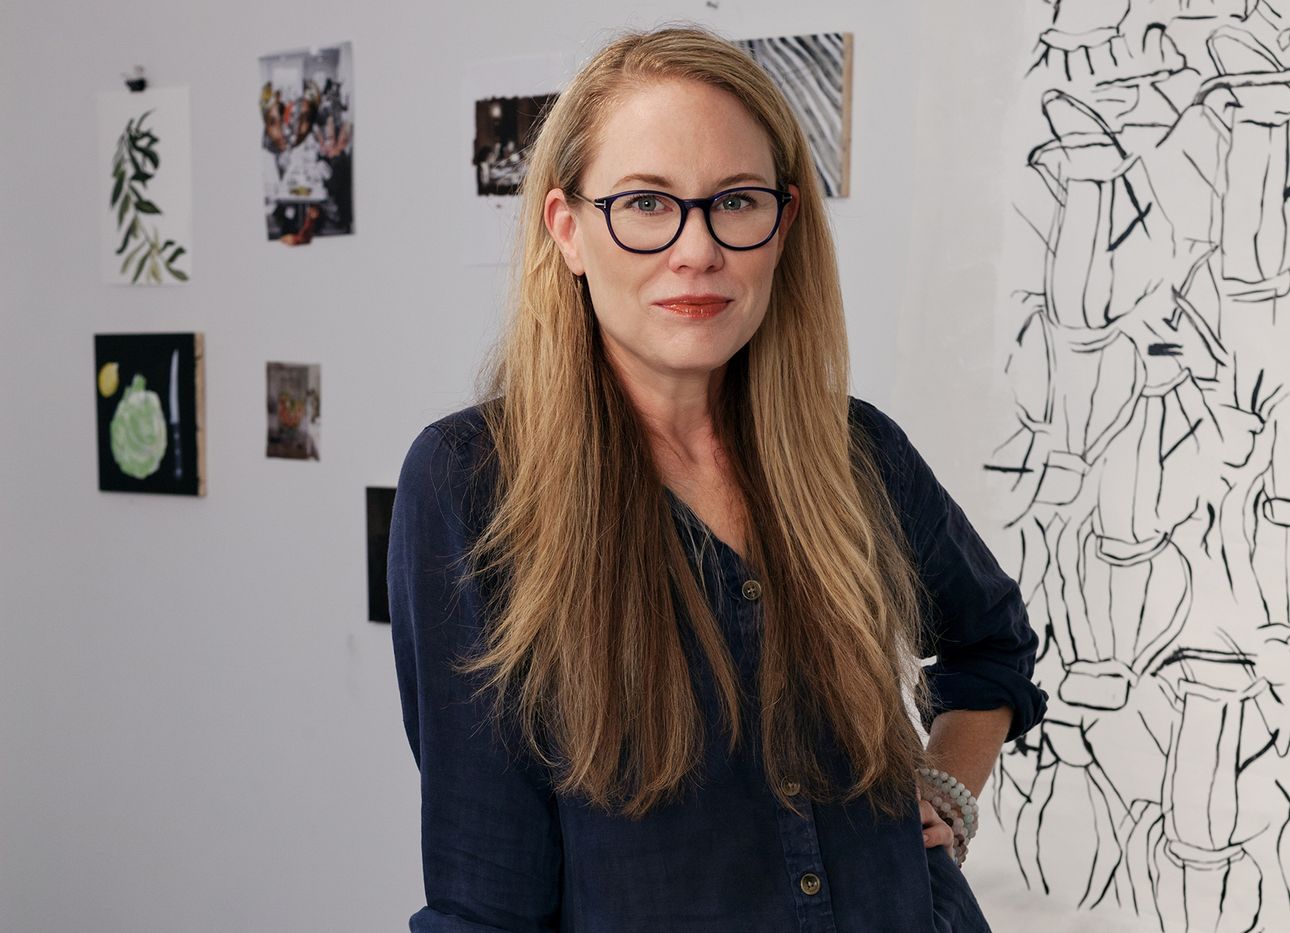 Catherine Haley Epstein stands with her hand on her hip in front of several drawings.